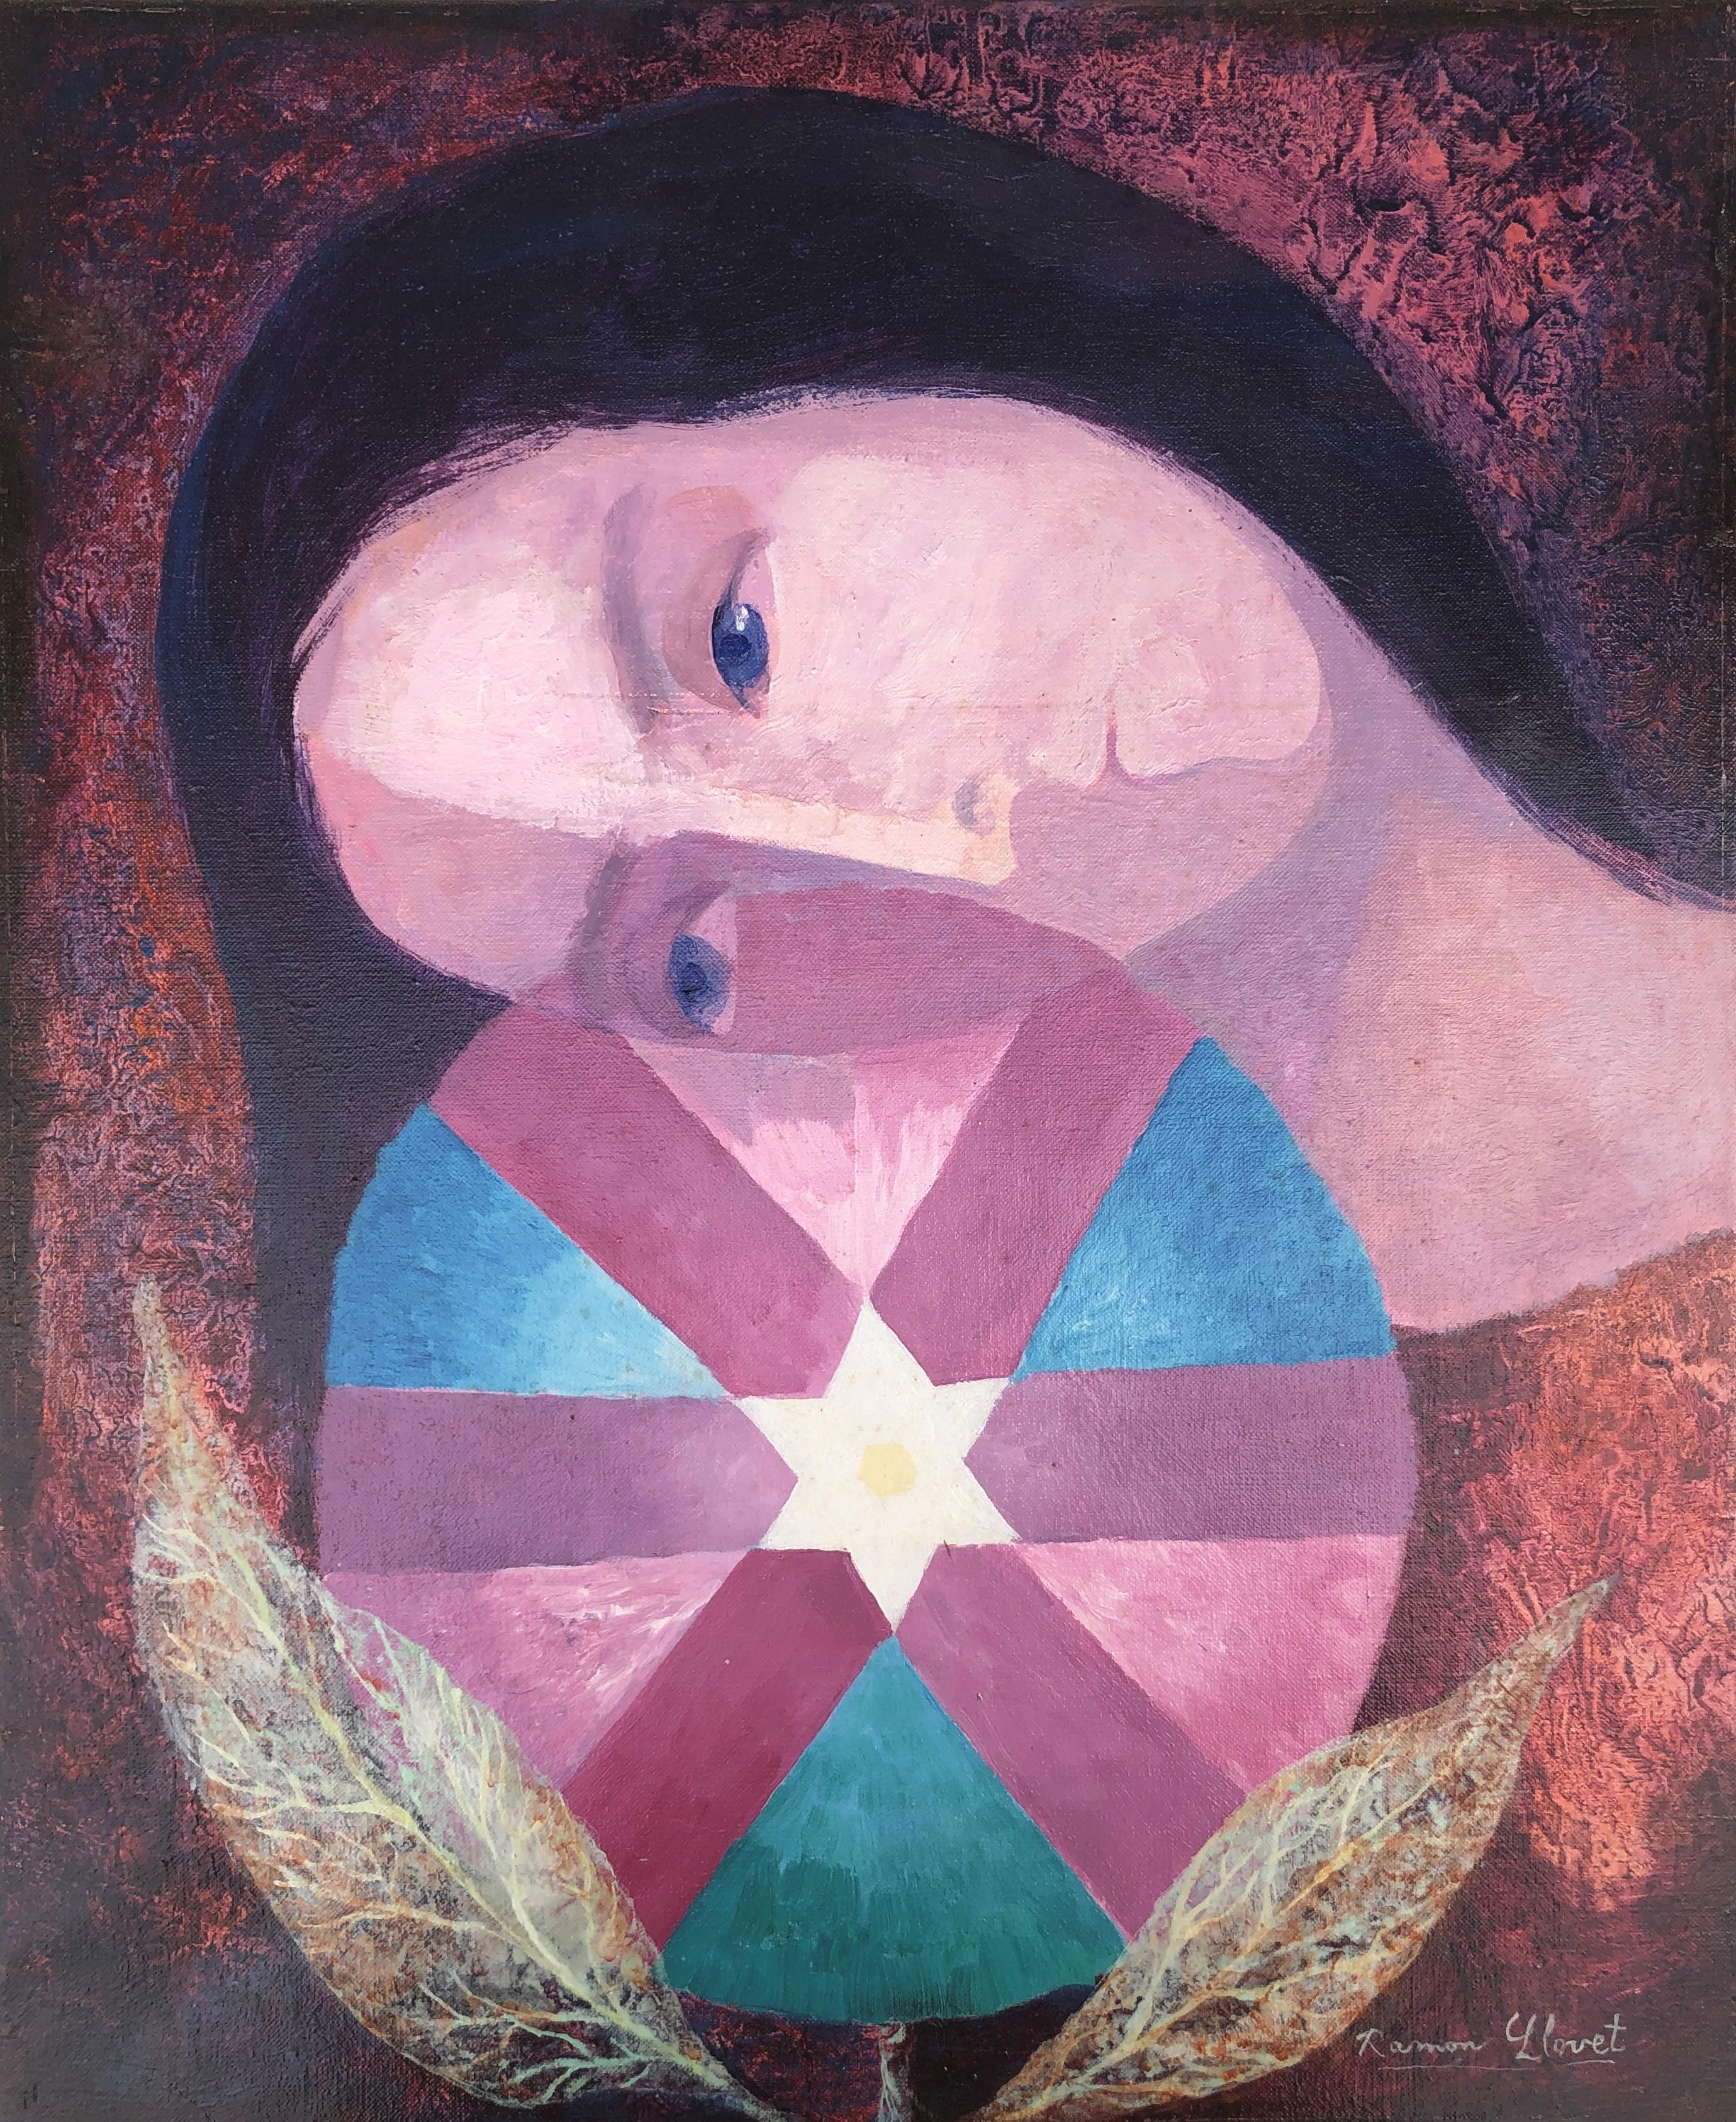 Woman and rose window oil on canvas painting surrealist